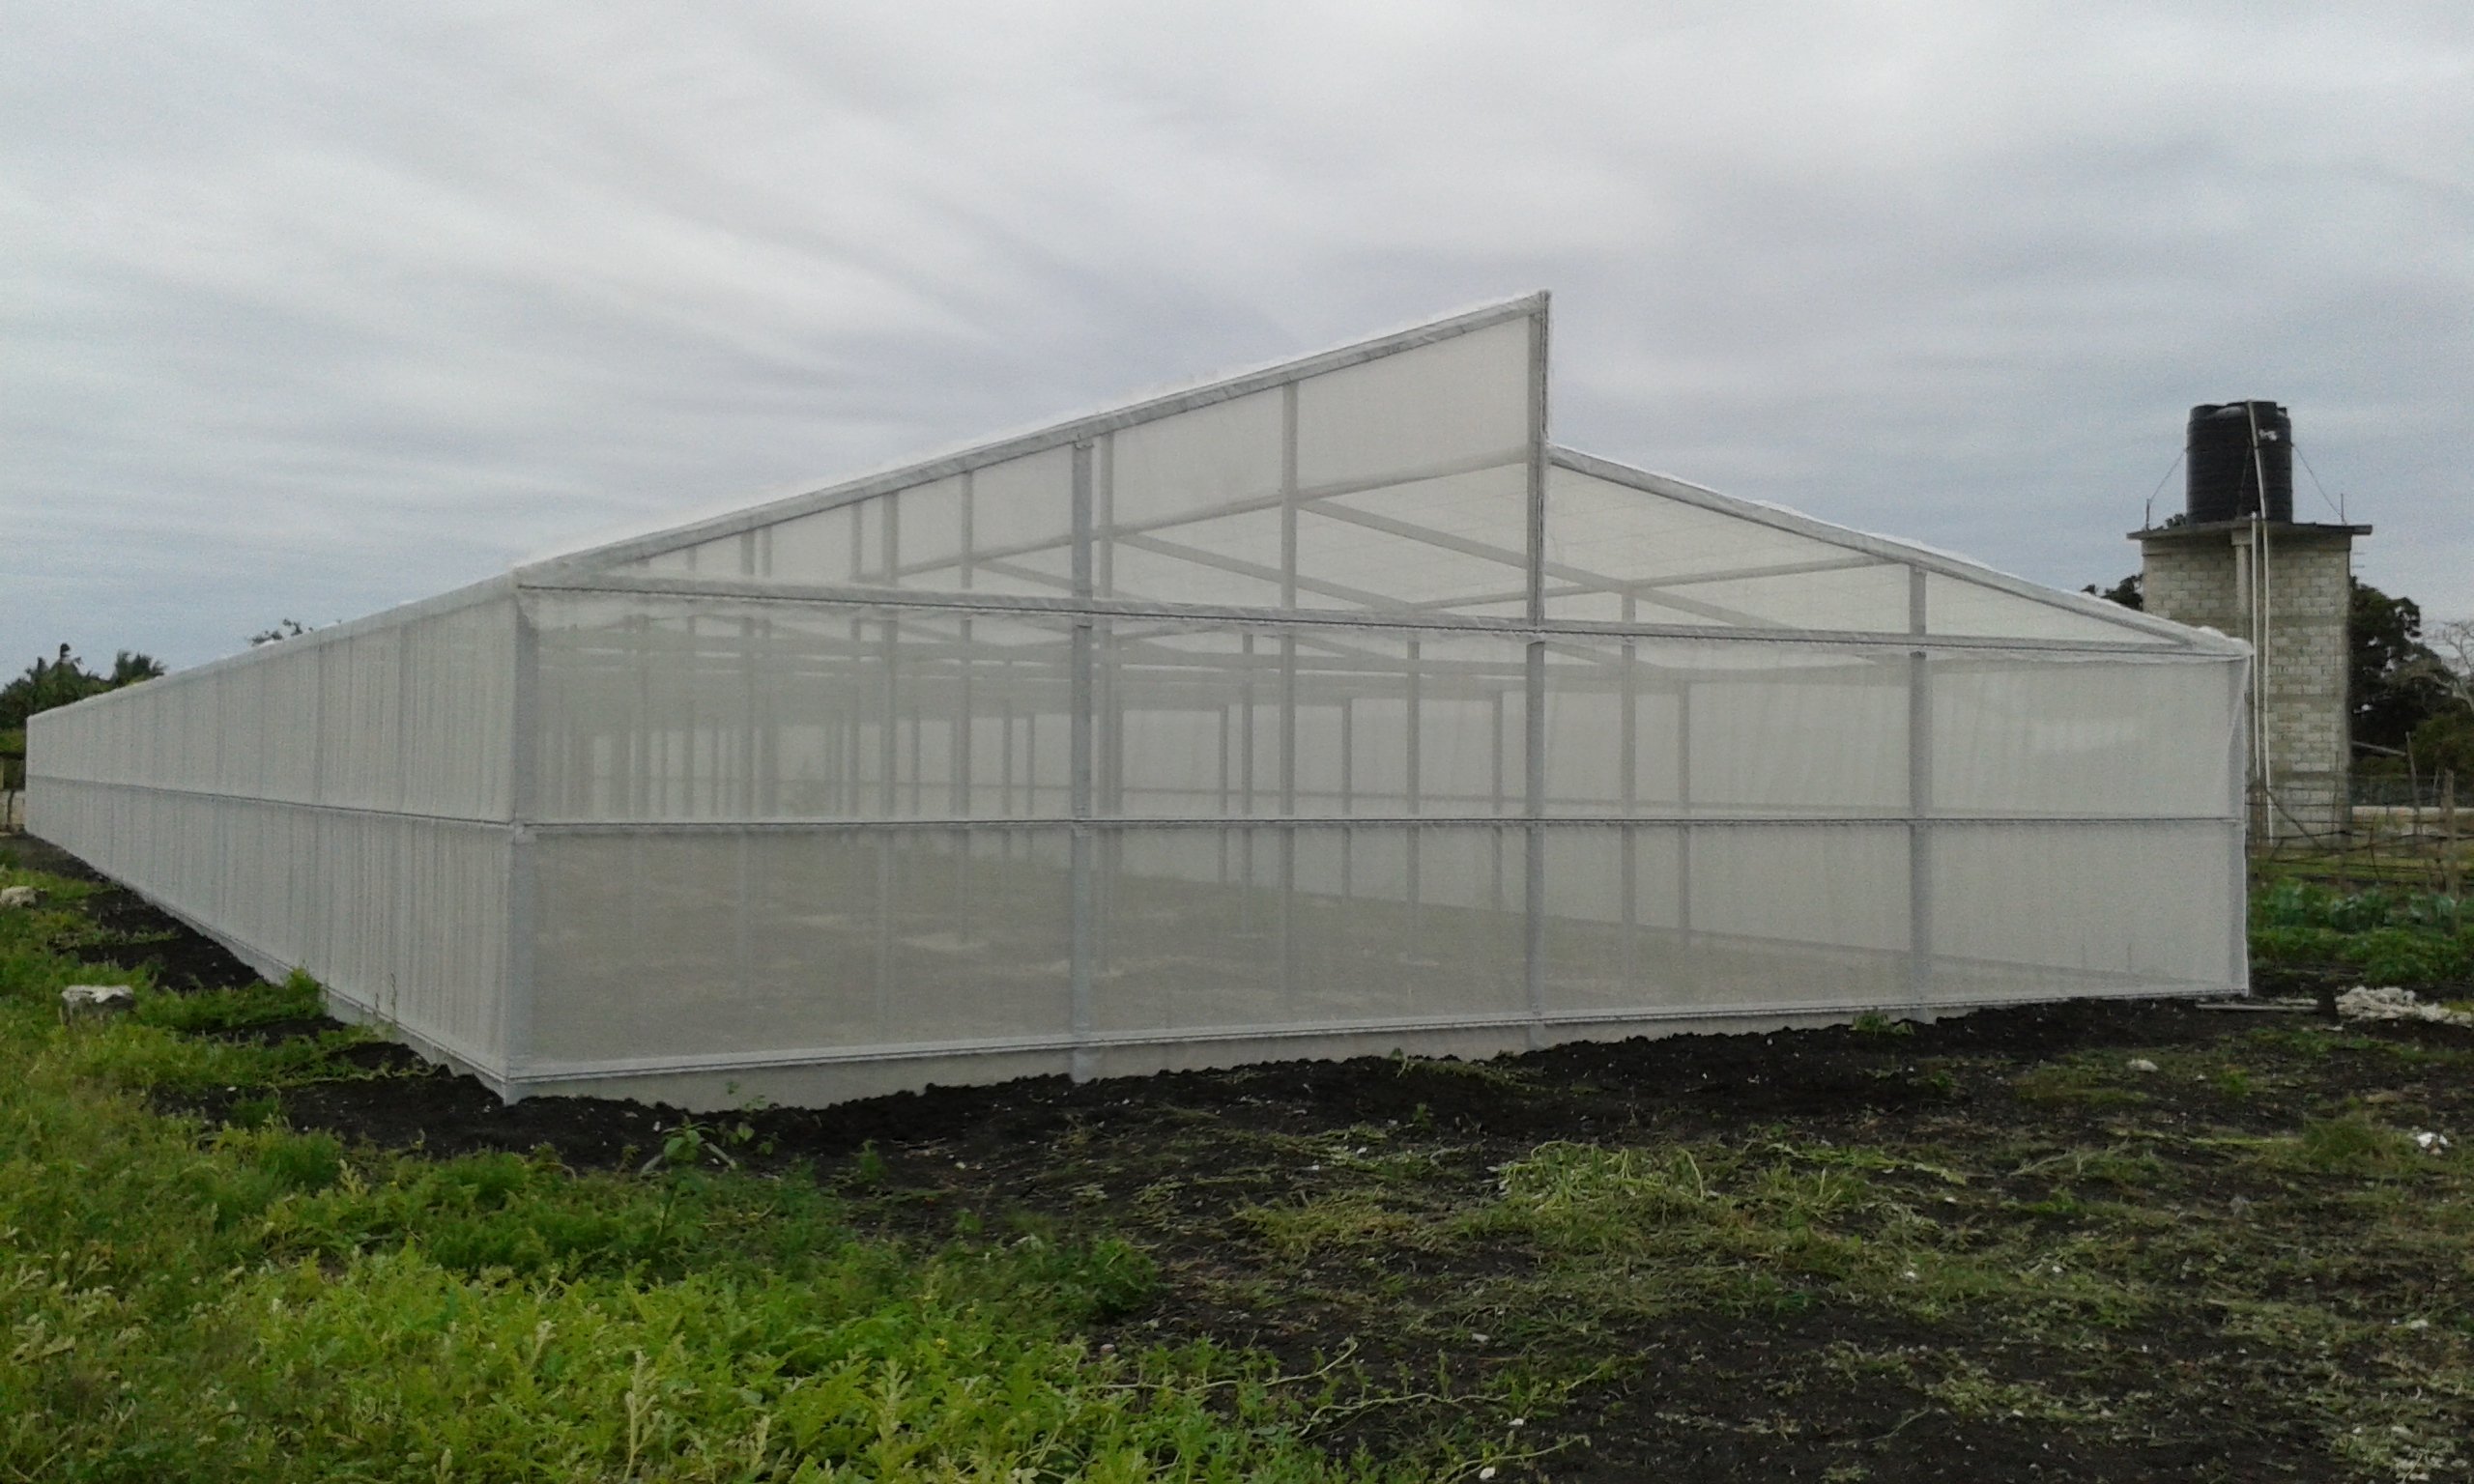 Teachers at ESTM High School will use the greenhouse to expose students to modern agricultural techniques and prepare them for careers in the agribusiness sector.